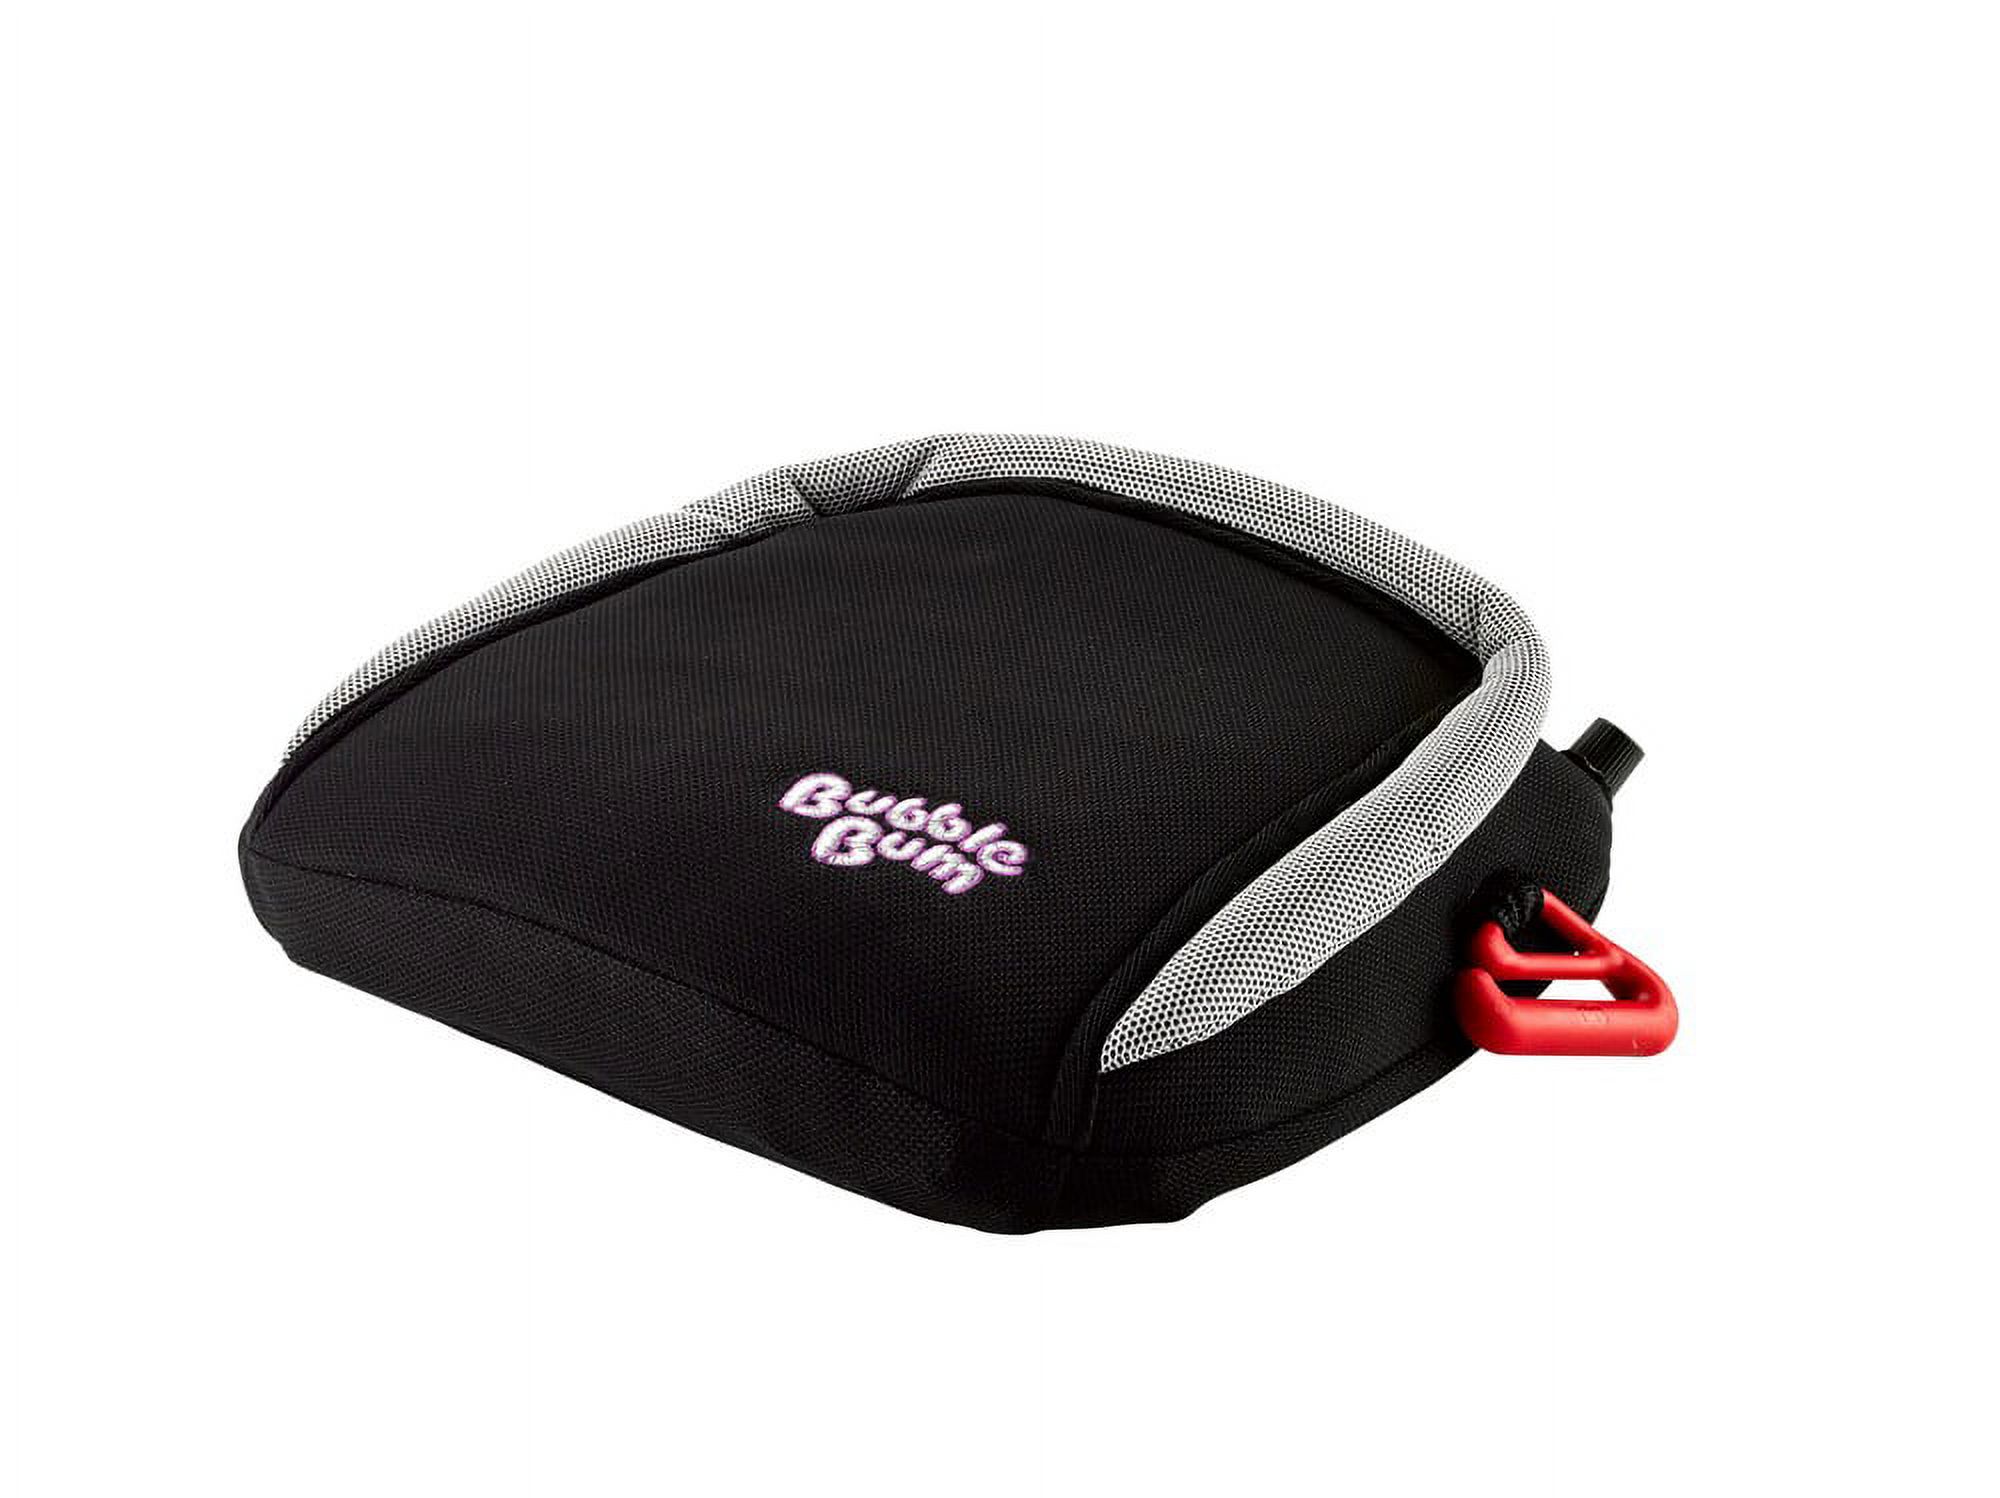 Bubblebum Backless Booster Car Seat, Black - image 1 of 7